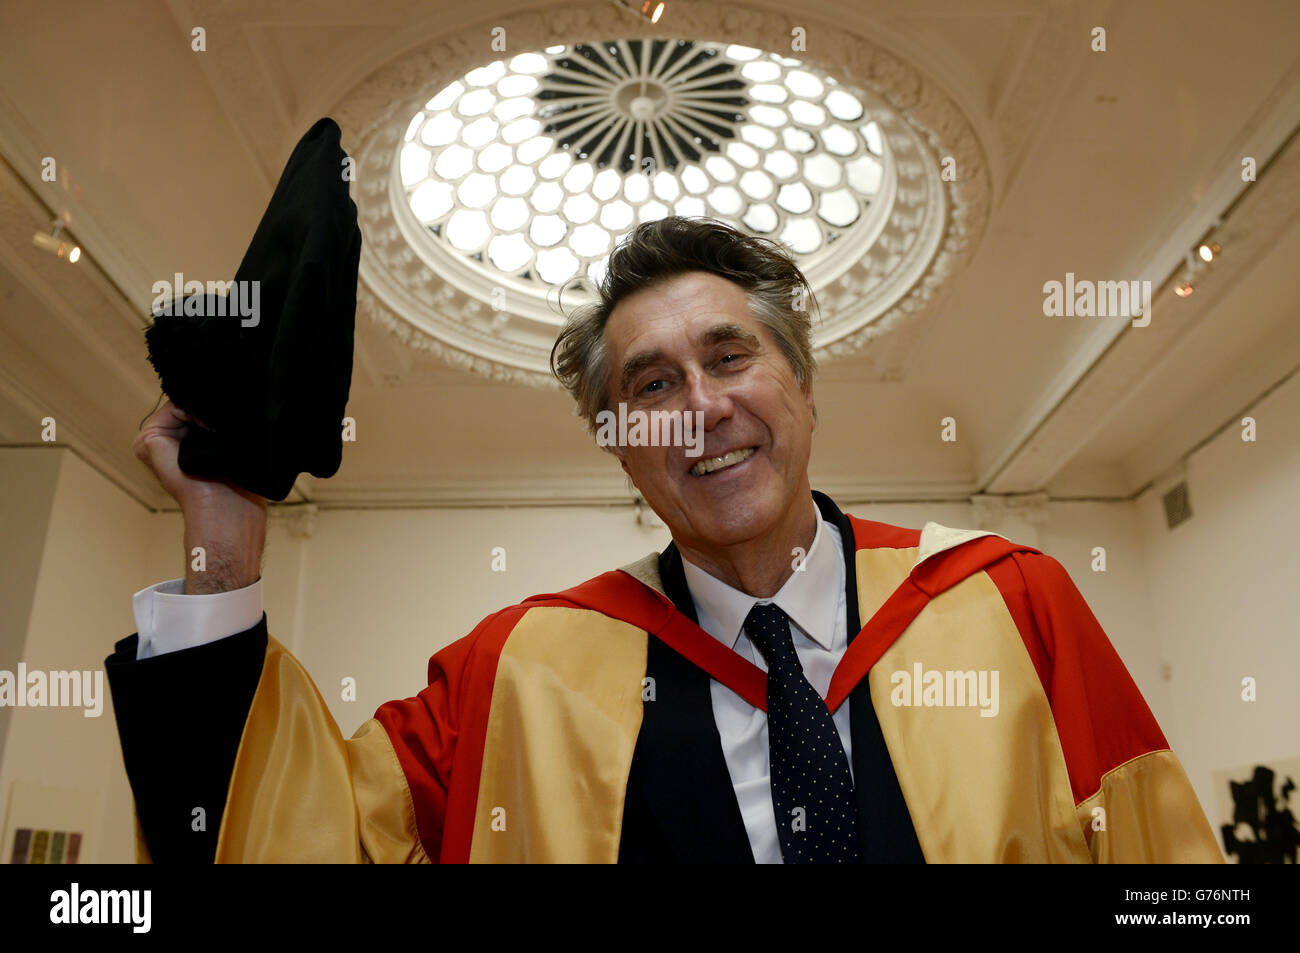 Legendary singer Bryan Ferry receives an honorary degree from Newcastle University as he is made an honorary Doctor of Music from the university where he graduated in Fine Art in 1968. Stock Photo